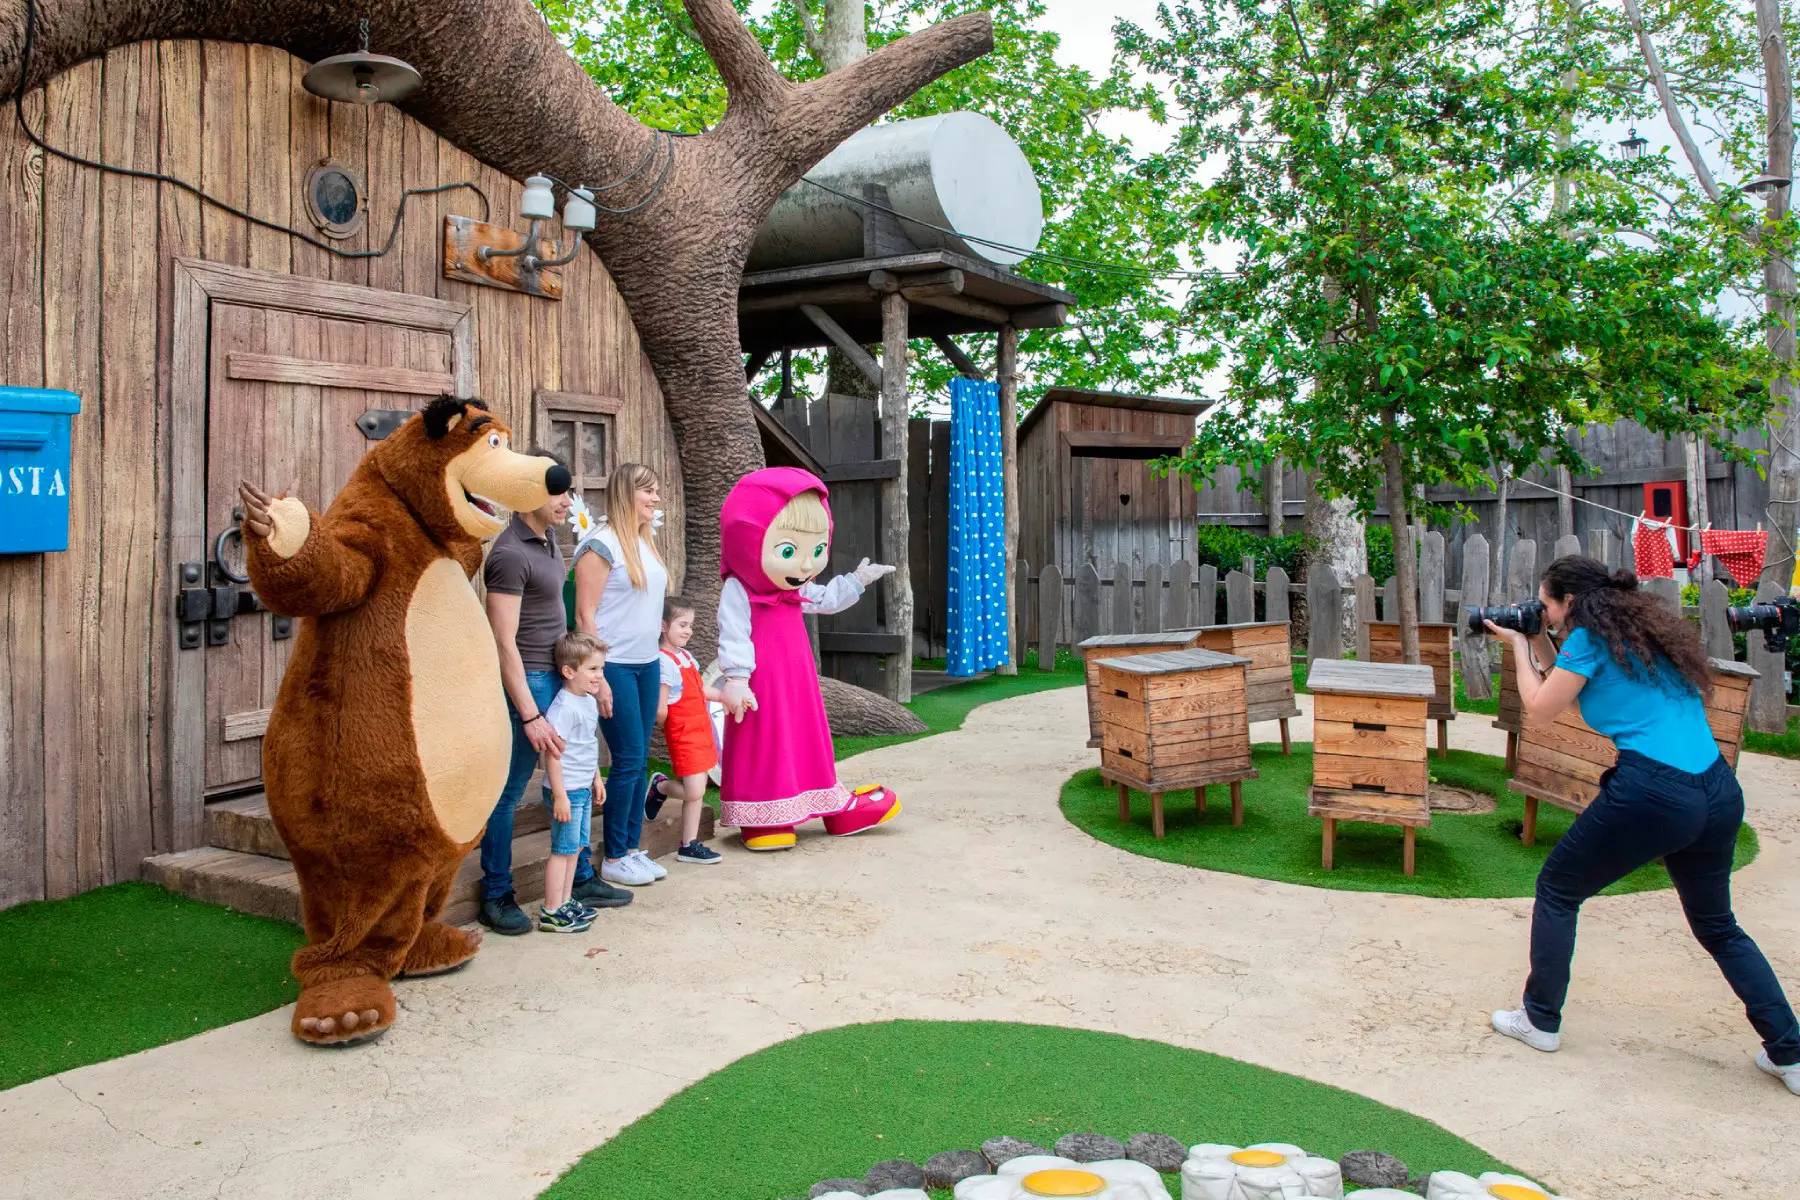 A family with children having their photo taken with Masha and the Bear at Leolandia Resort in Italy